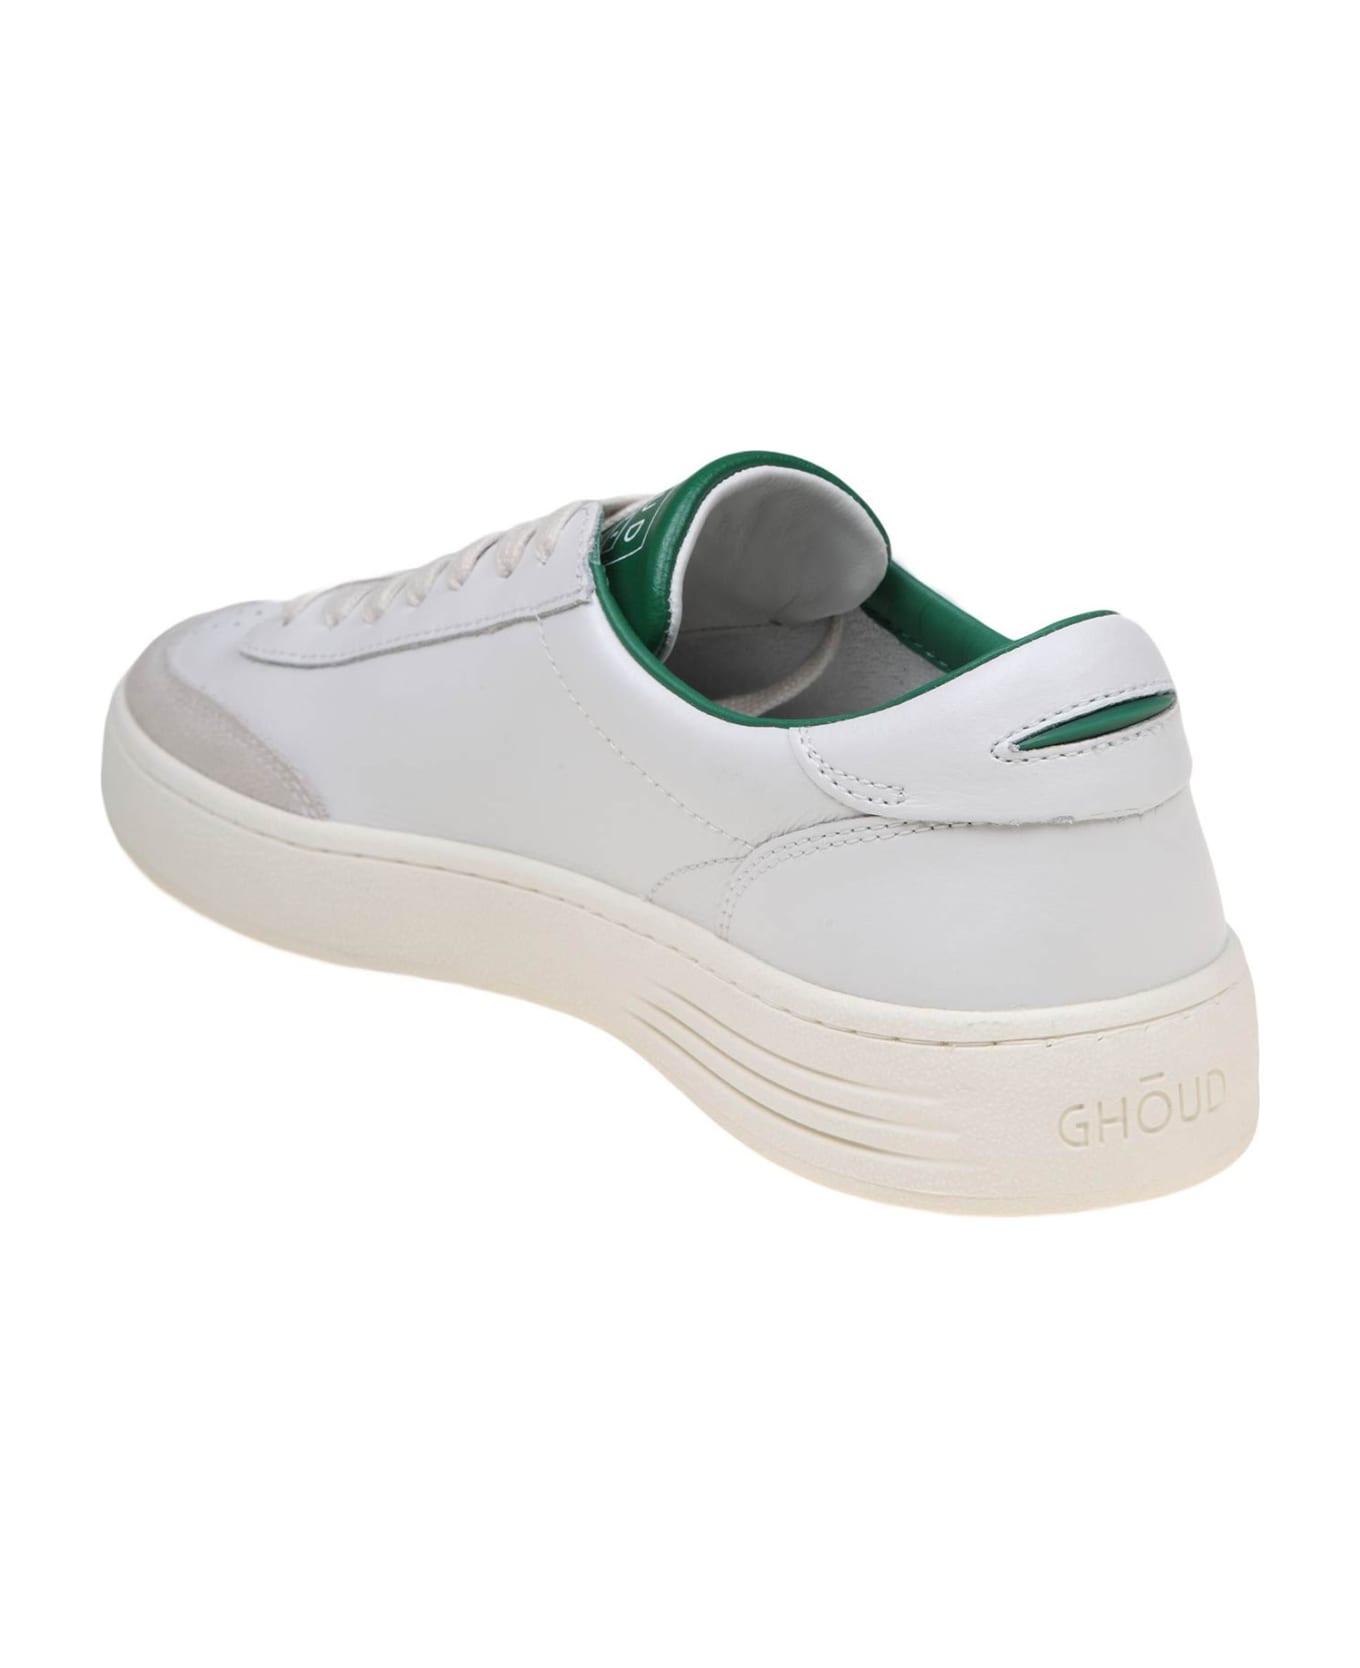 GHOUD Lido Low Sneakers In White/green Leather And Suede - leat/suede wht/grn